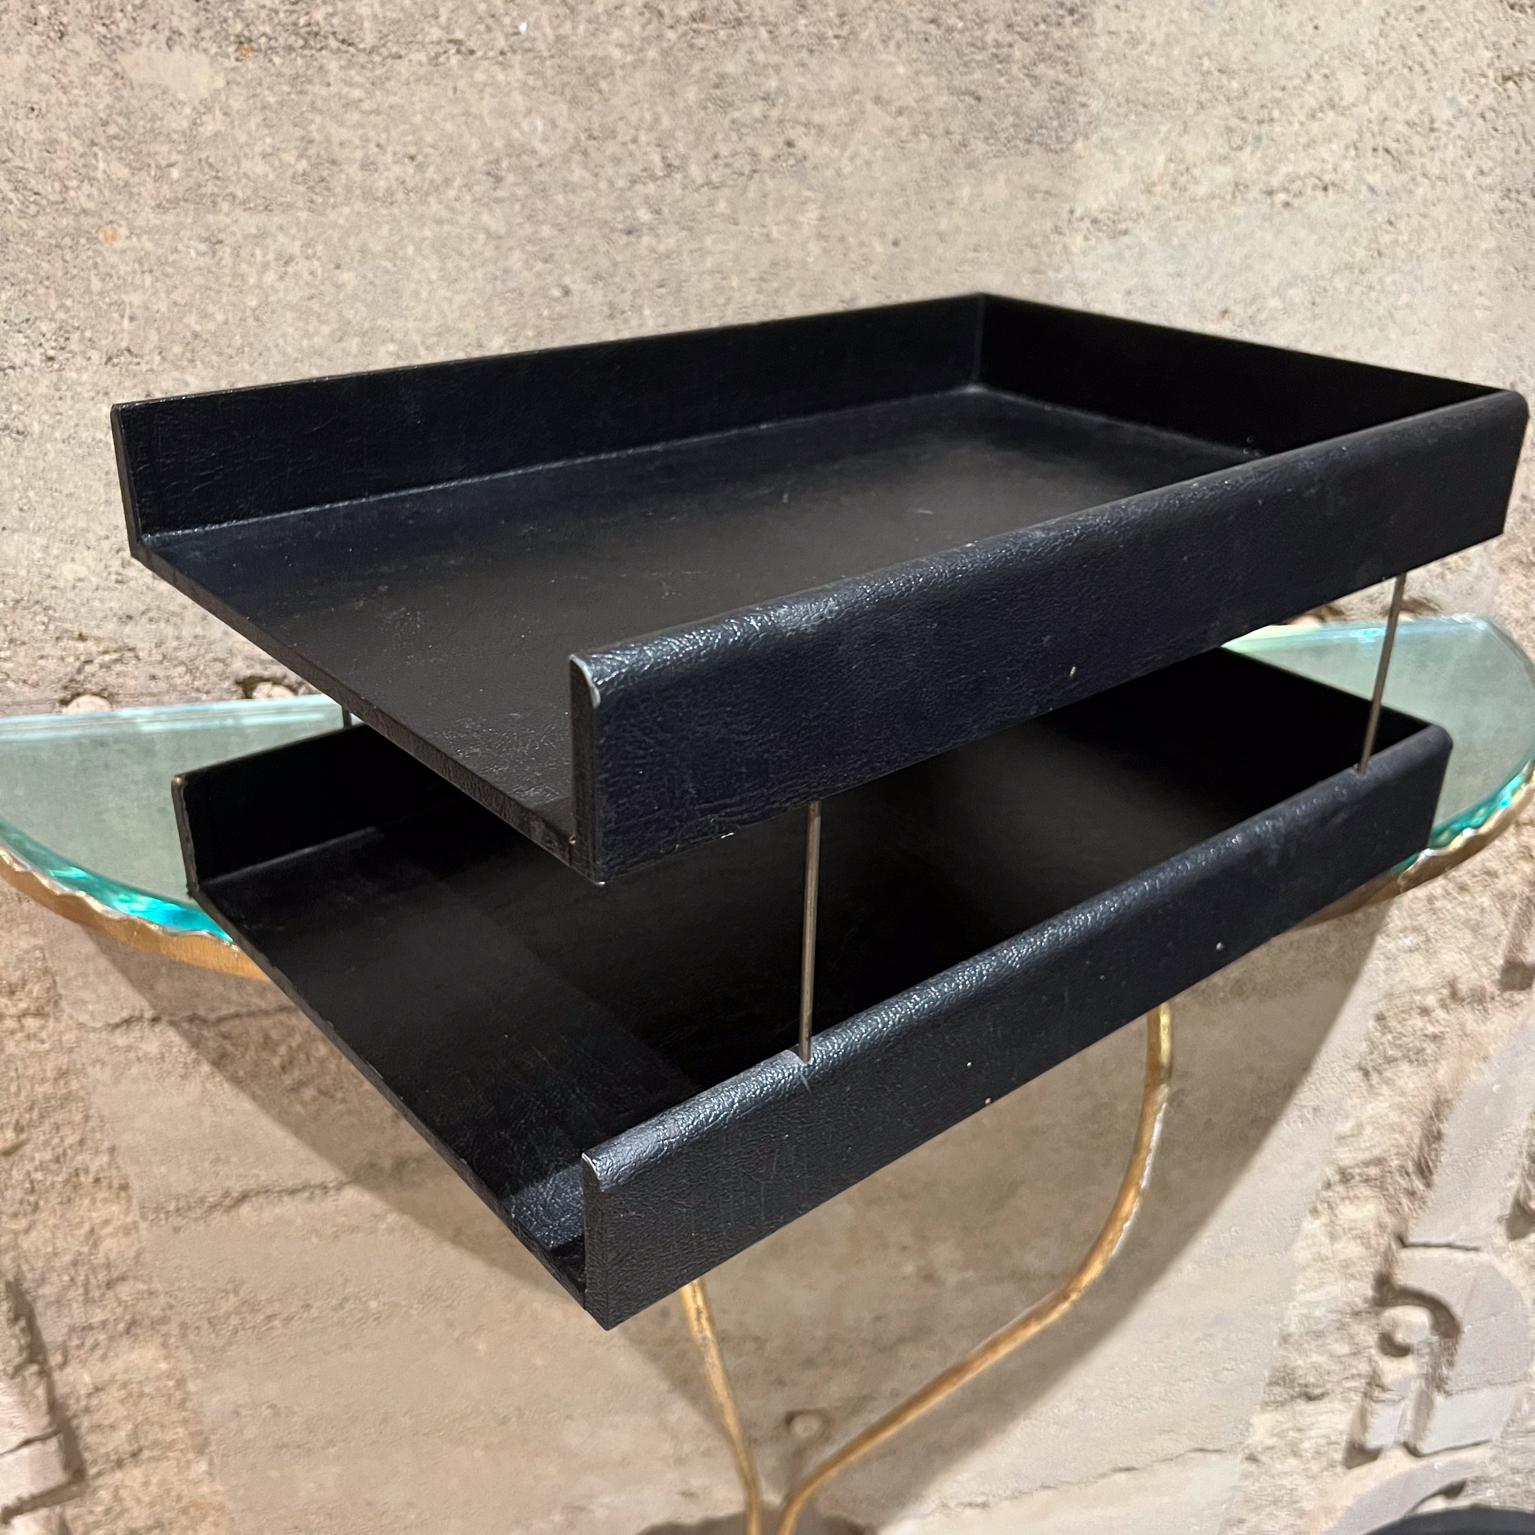 1970s Midcentury Black Tiered Letter Desk Tray Office File 
Wood with faux leather
Scuffs present around edges.
No label.
15 D x 9.88 w x 7 H
Preowned original vintage condition. See all images.
Firm and sturdy.